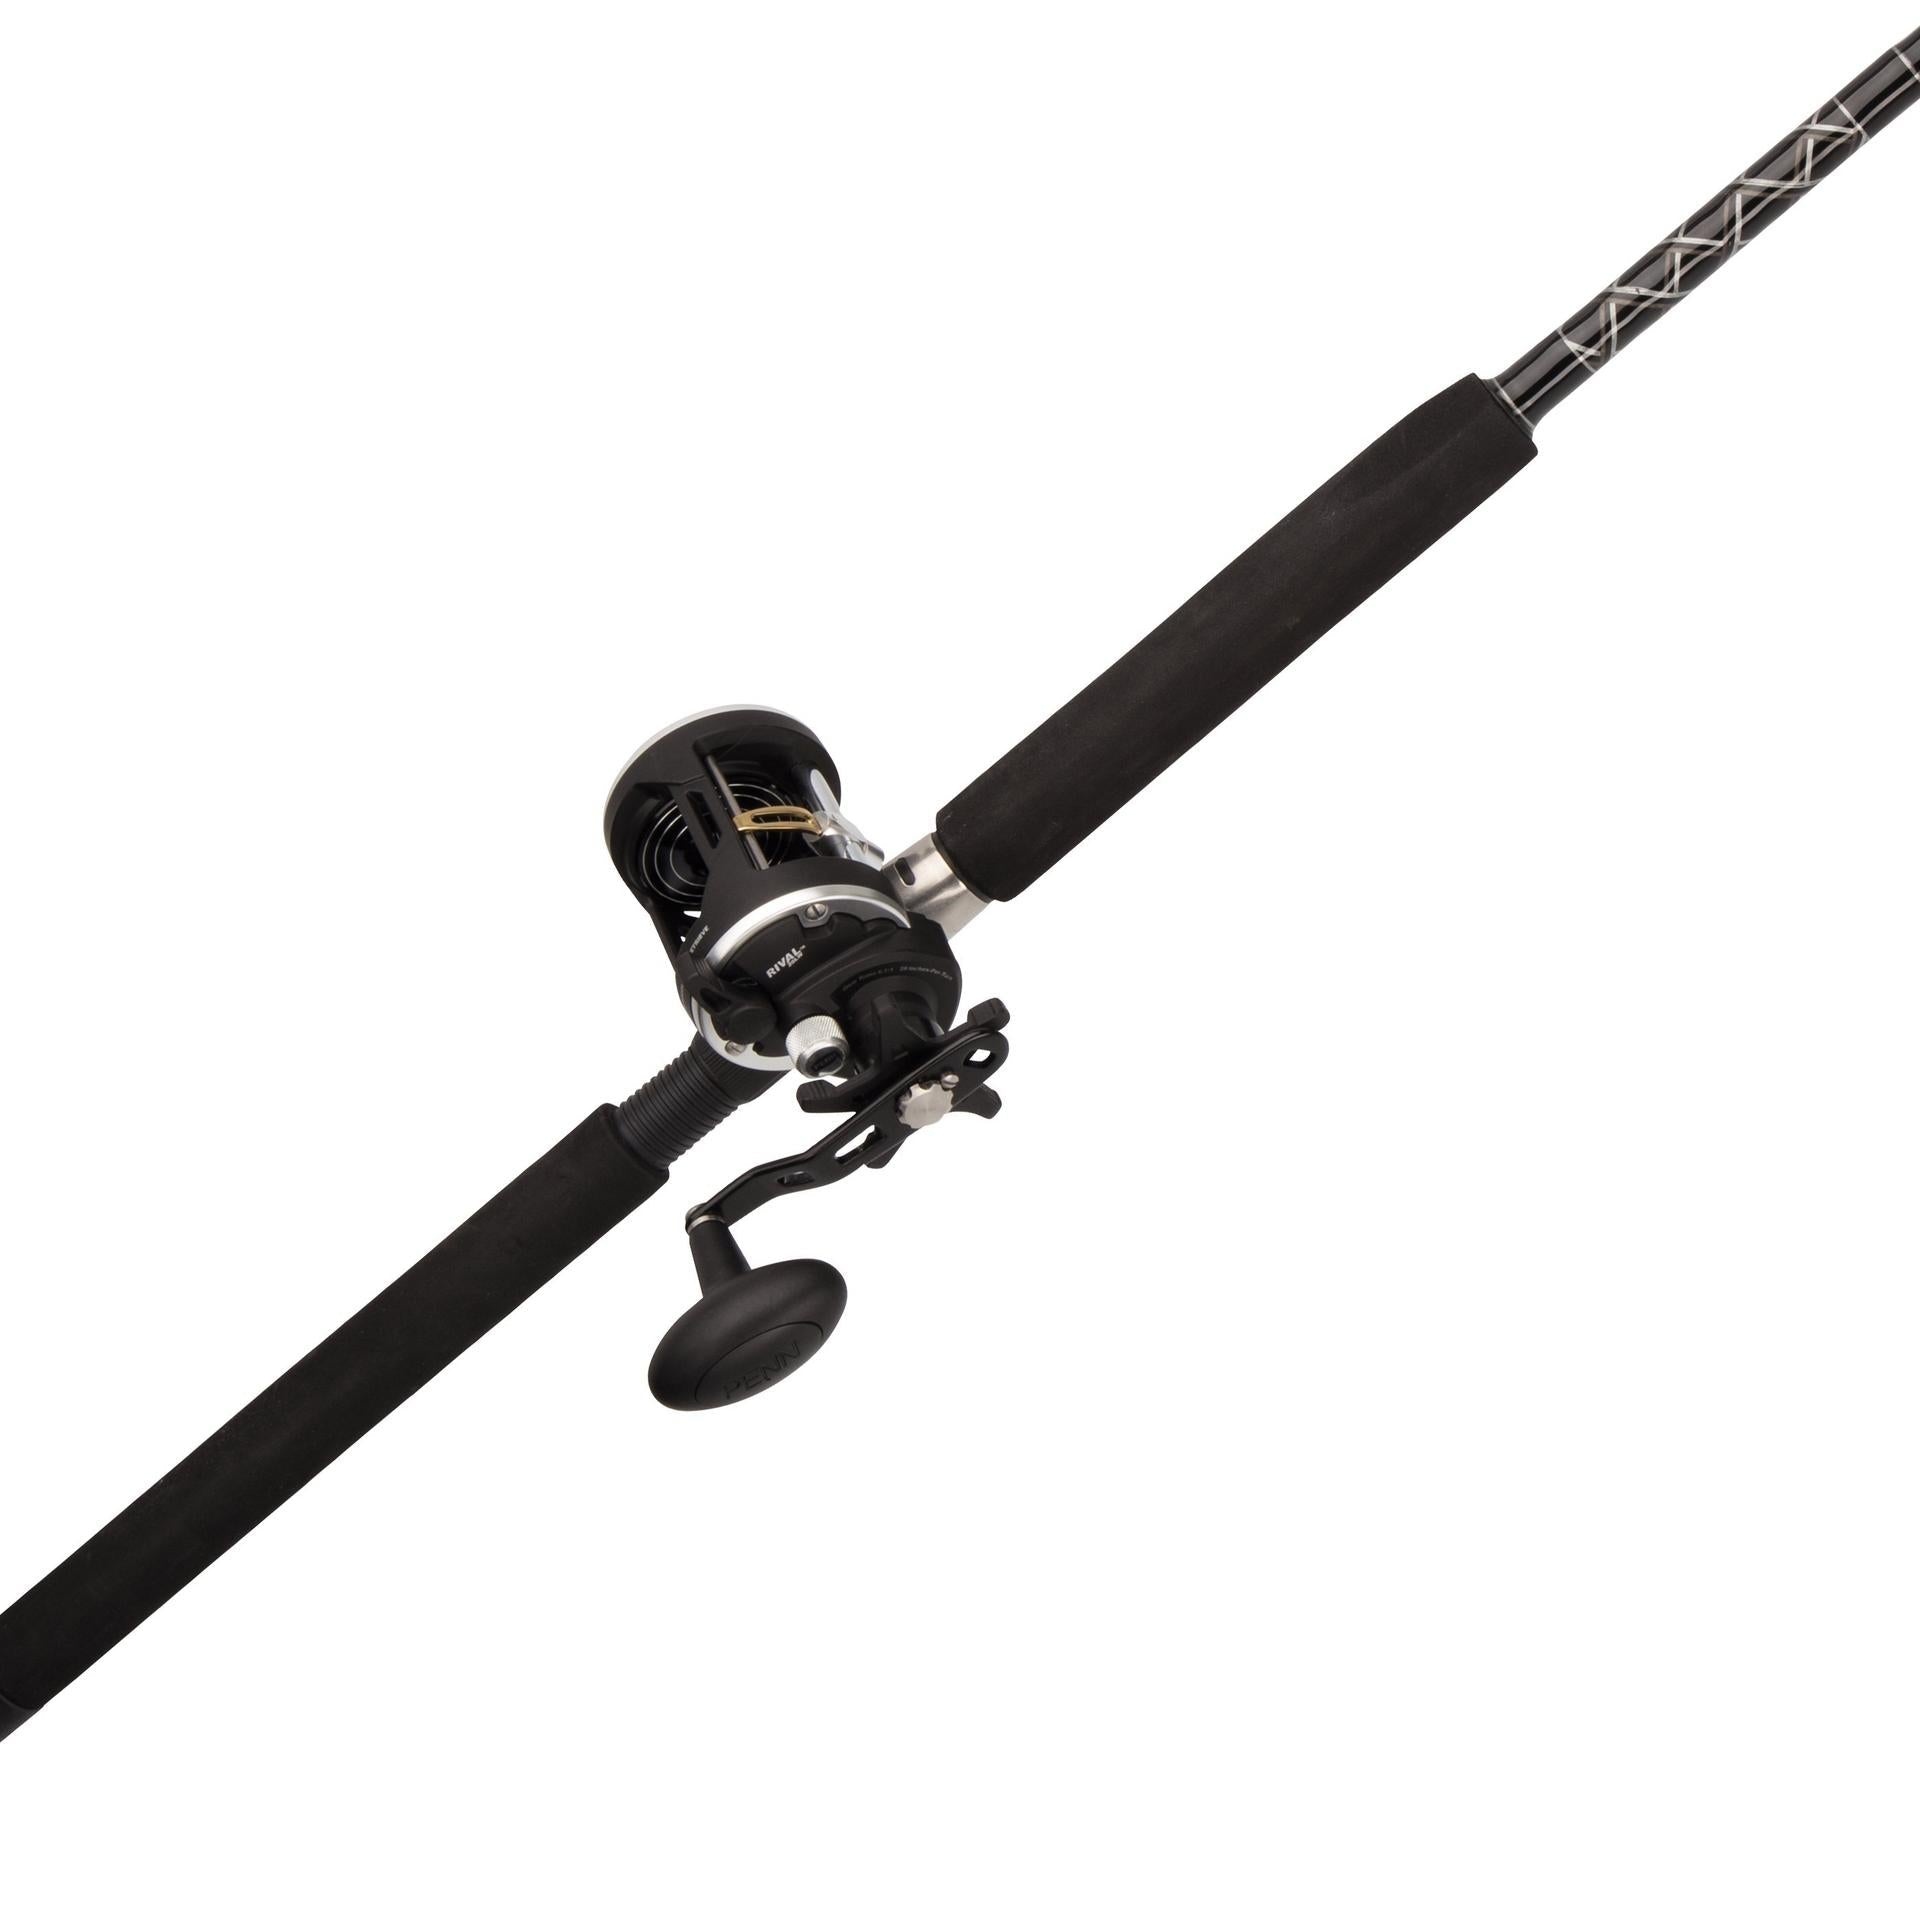 Penn 1404029 3.25 lbs Rival Level Wind Conventional Reel & Rod